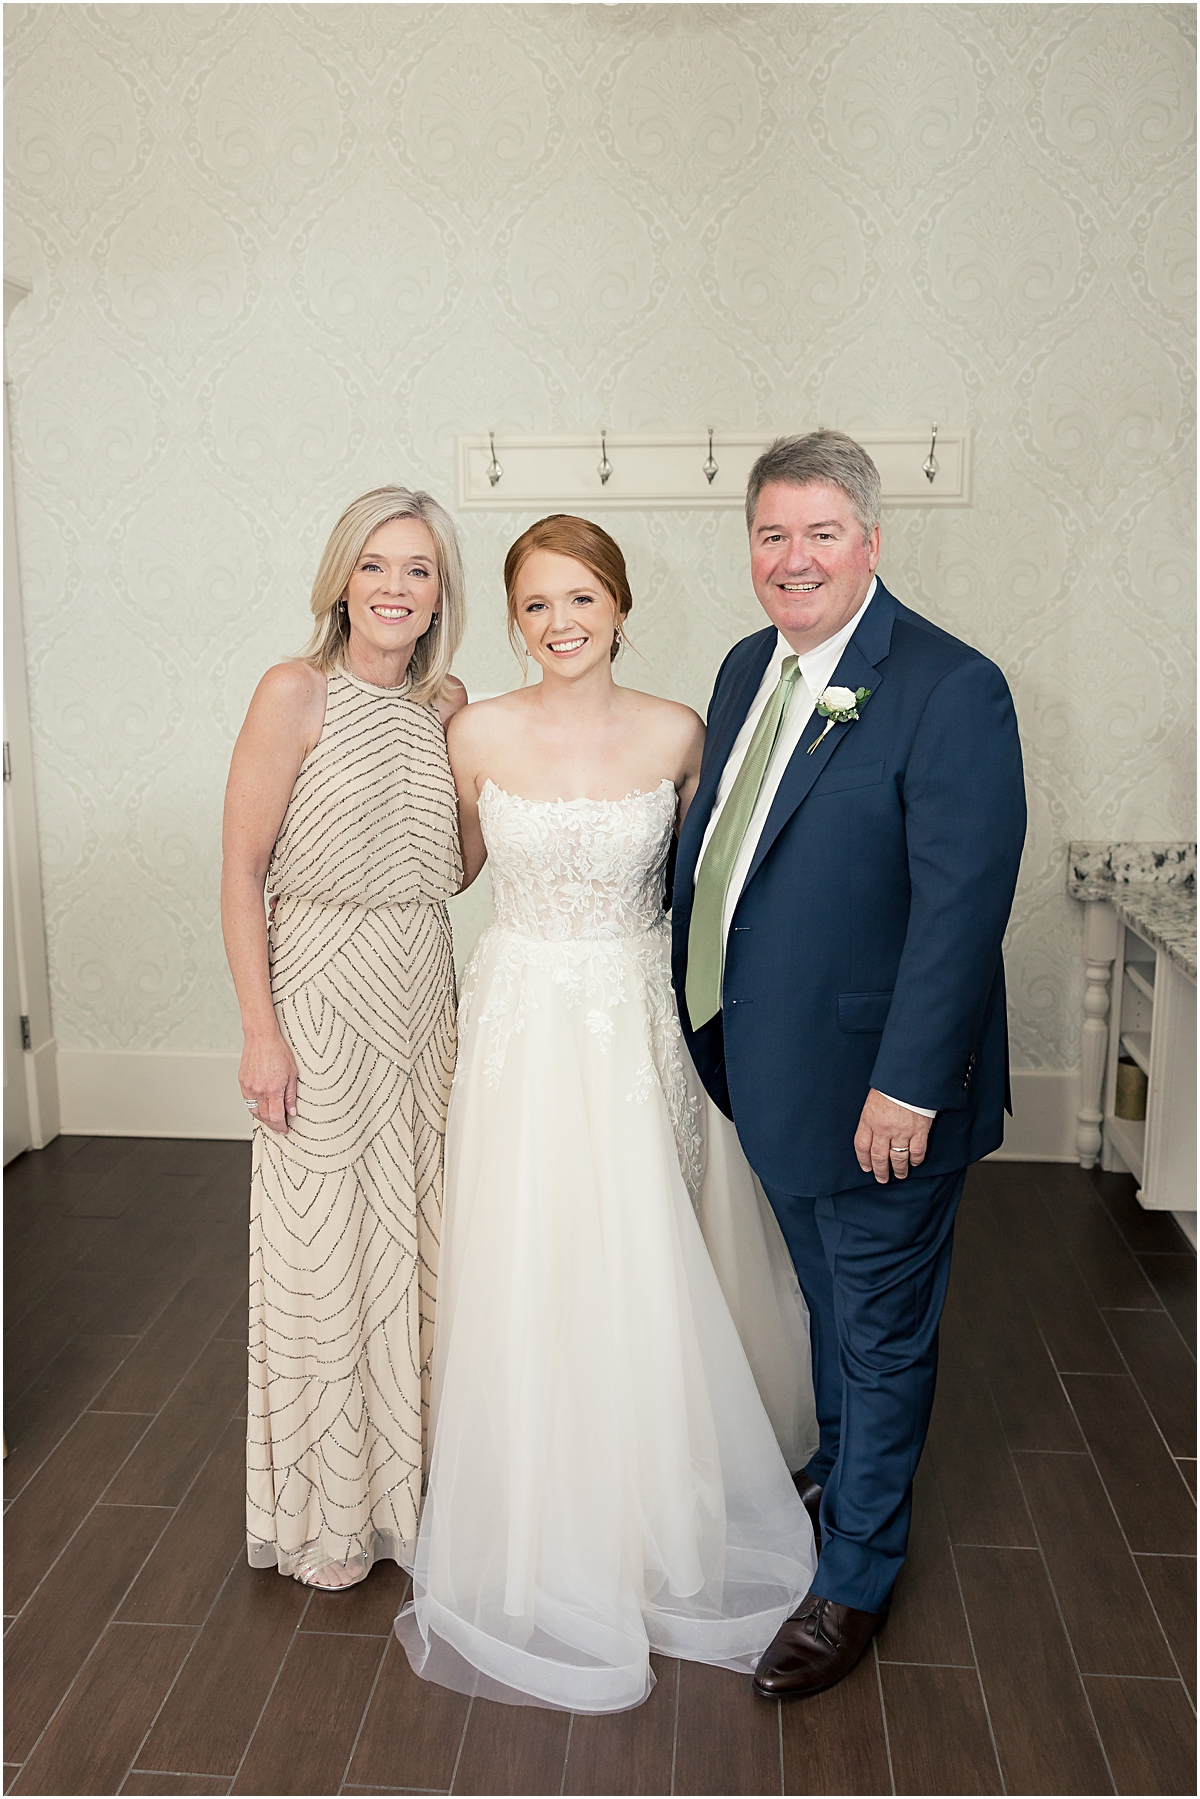 Grace with her family at Cleveland GA Wedding Venues